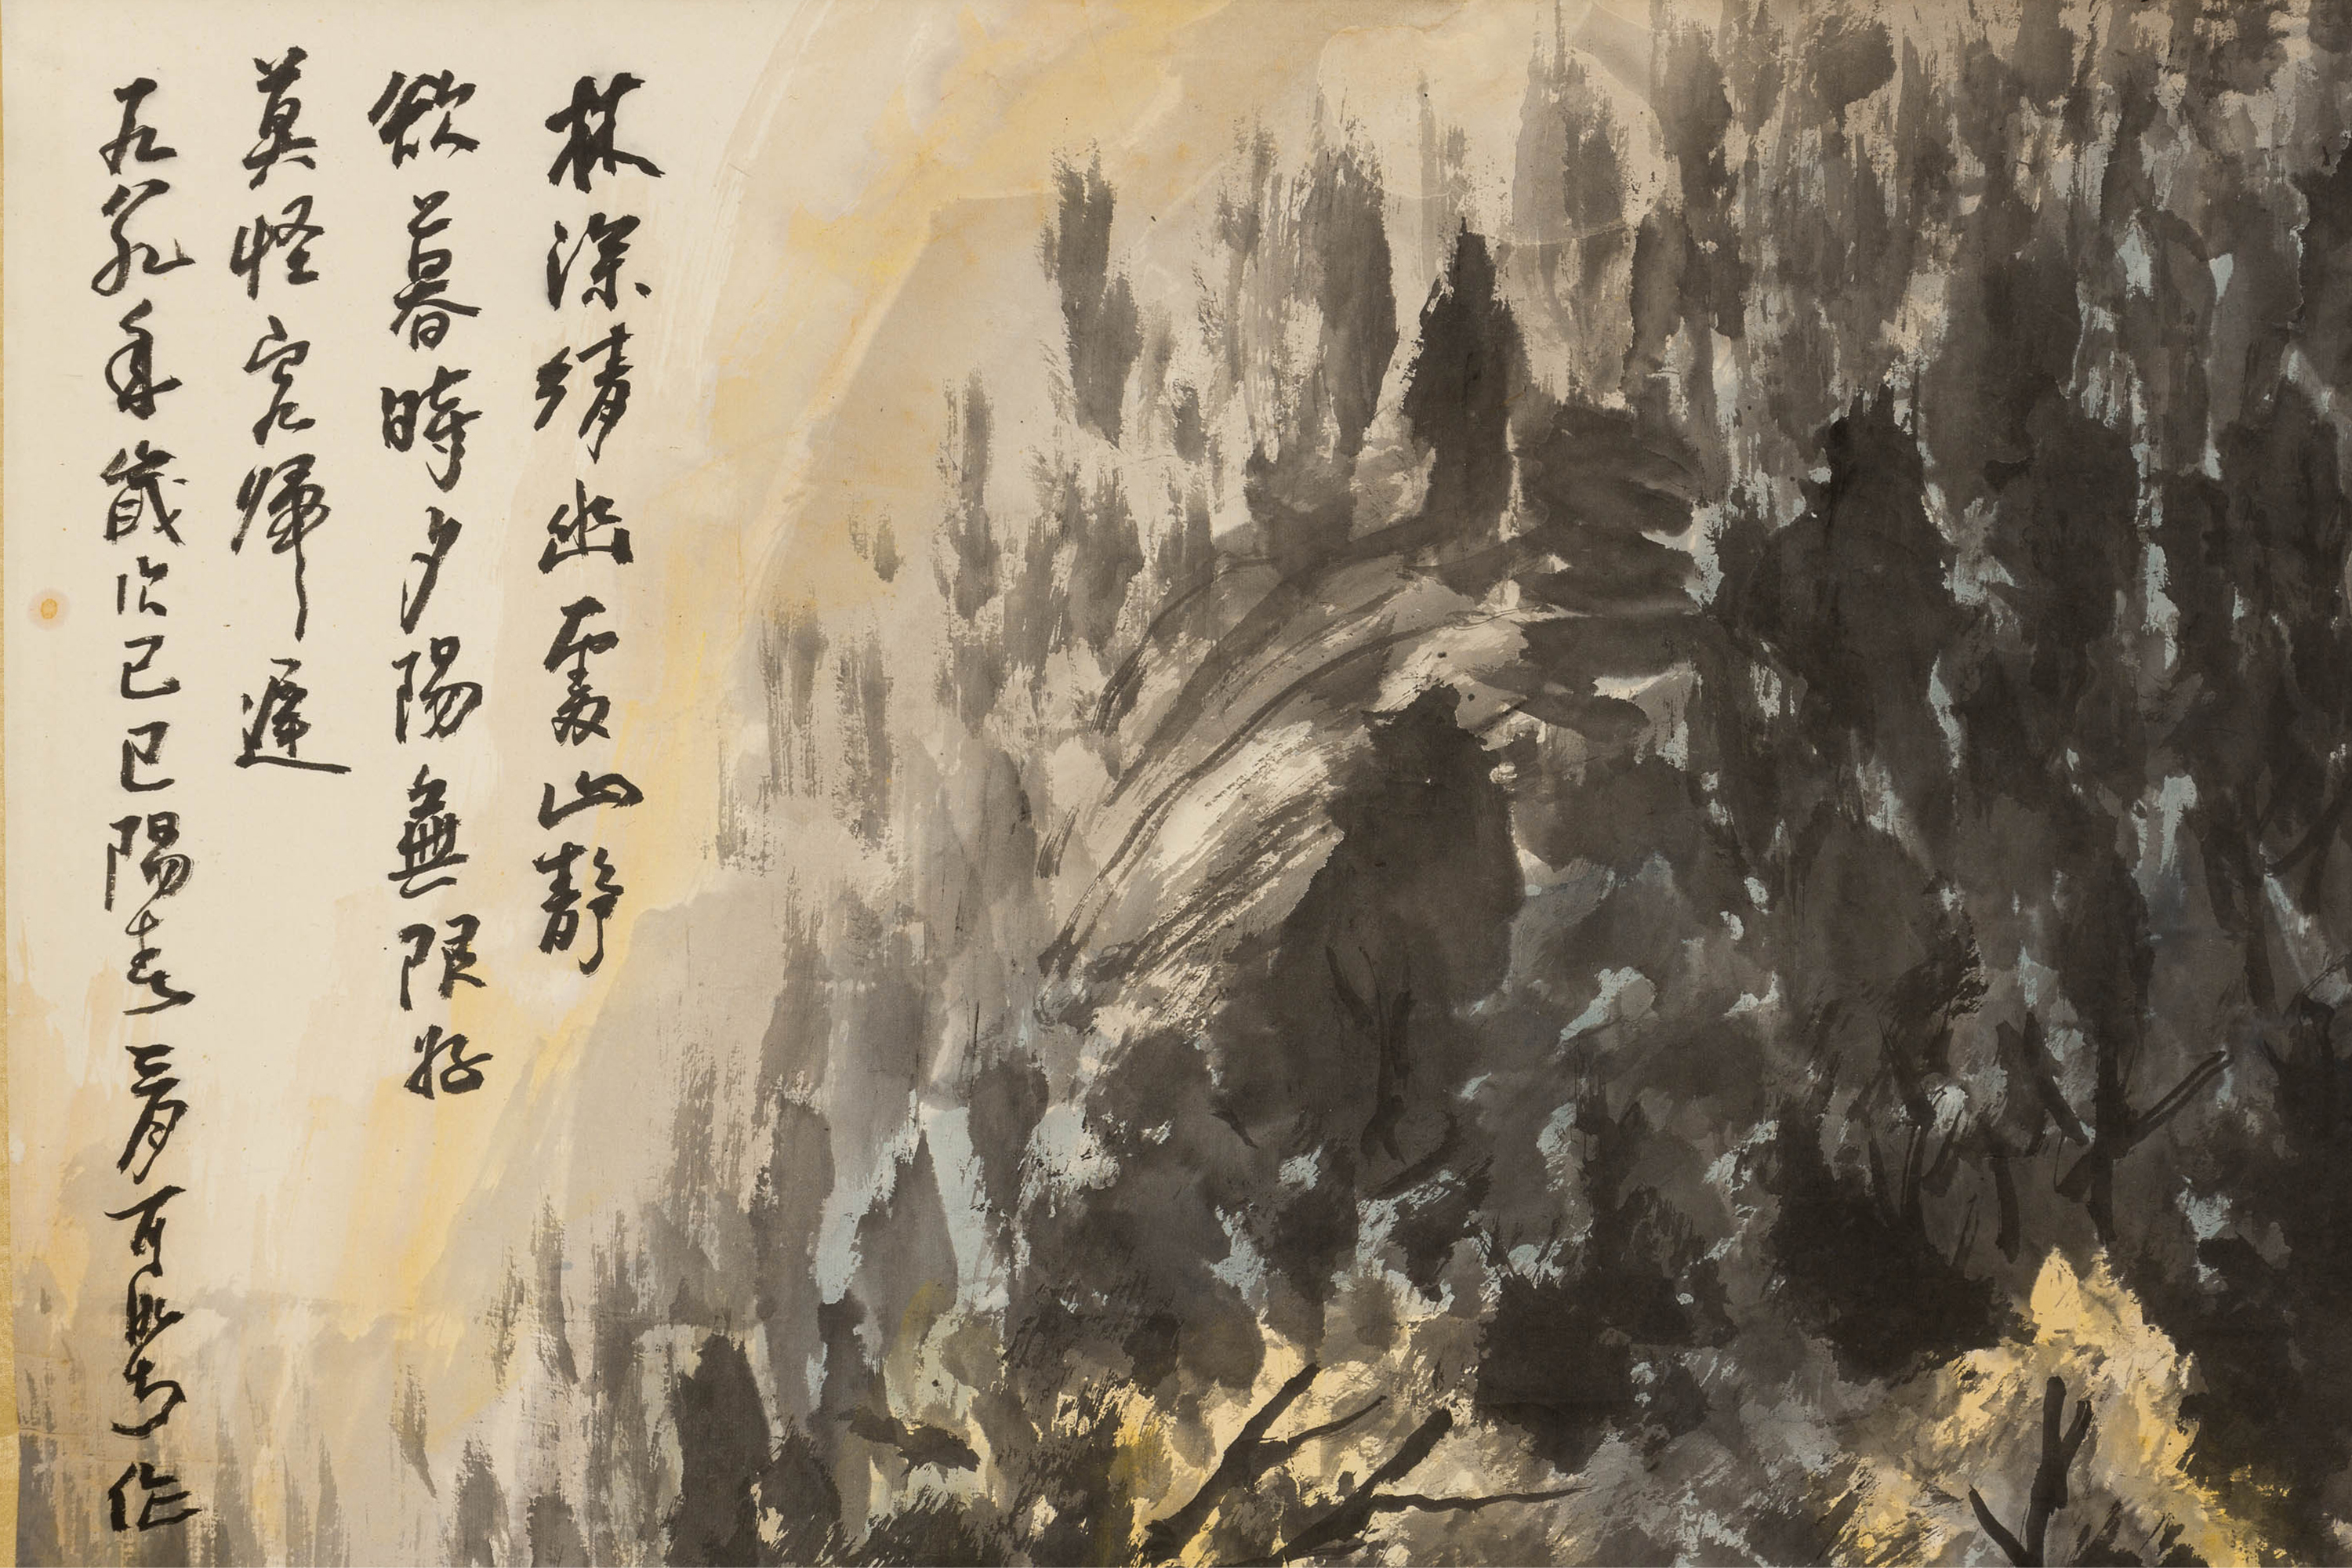 A CHINESE LANDSCAPE SCROLL IN THE STYLE OF LI KERAN - Image 2 of 3